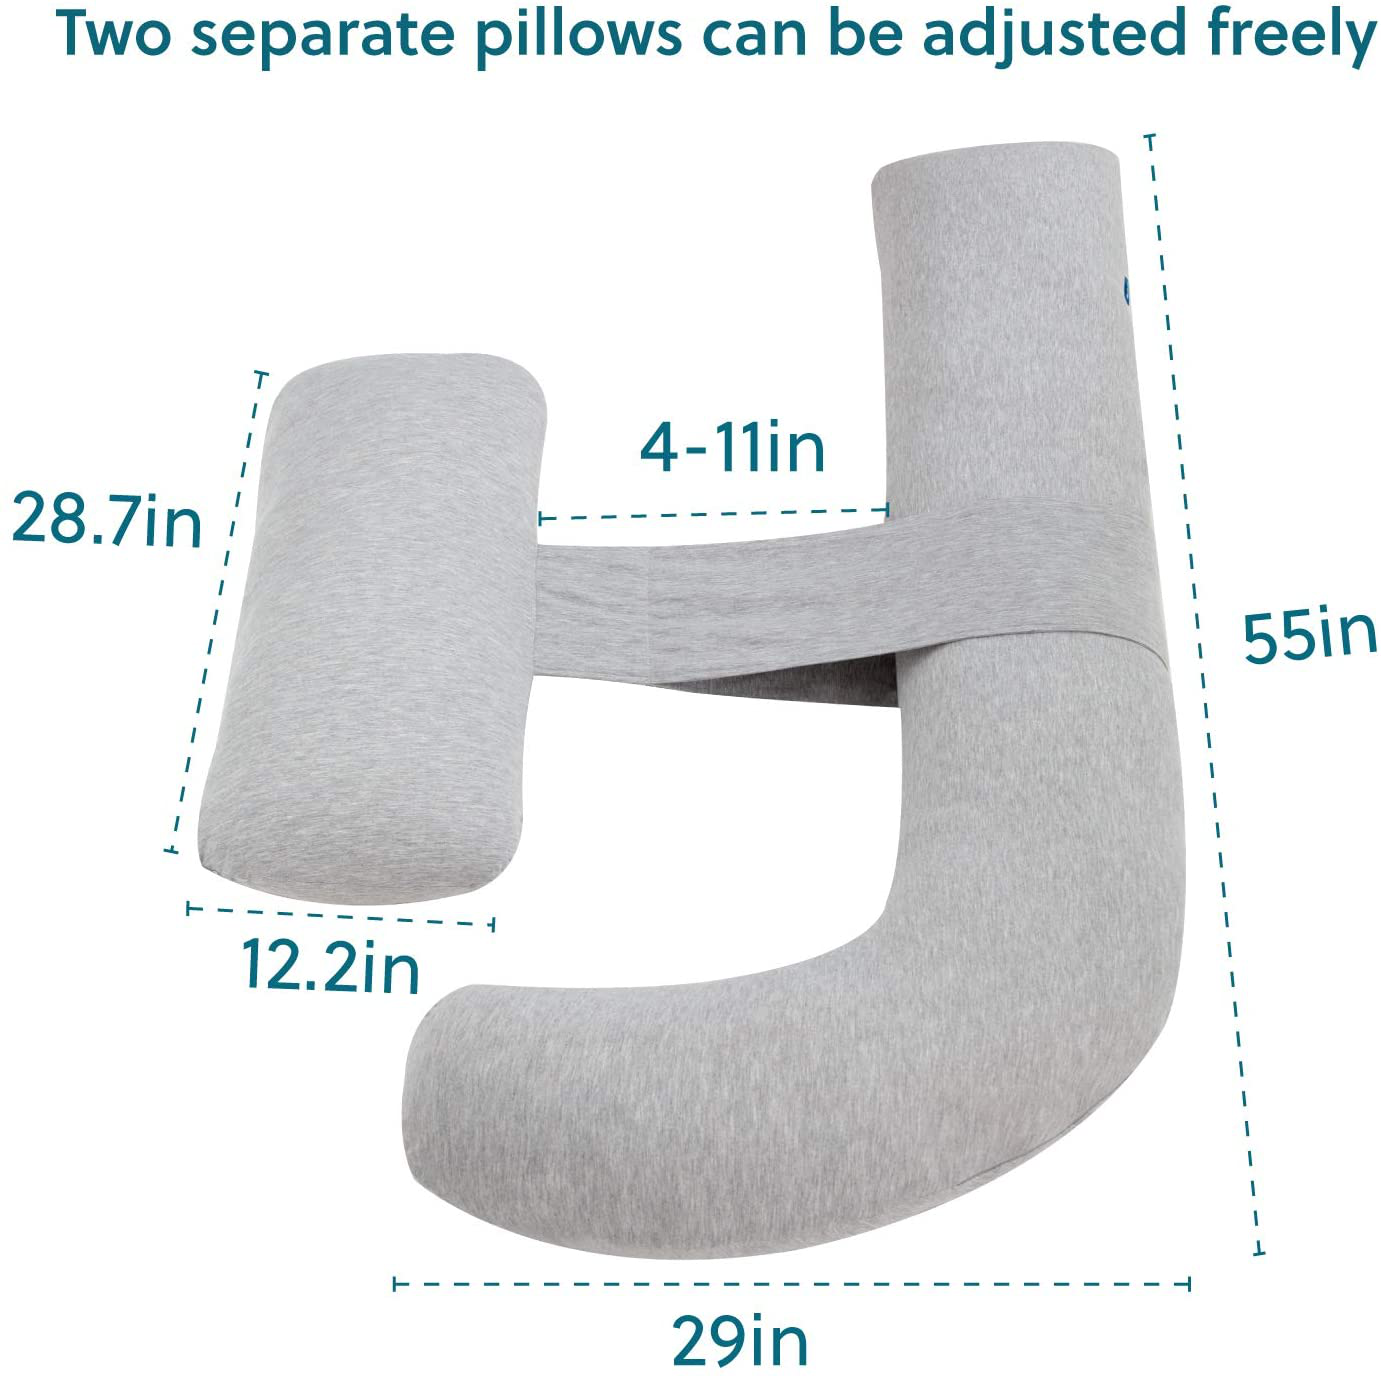 Bedsure Pregnancy Pillows for Sleeping, H-Shaped Adjustable Maternity Full Body Pillow for Pregnant Women with Washable Cover - Detachable Extension, Grey